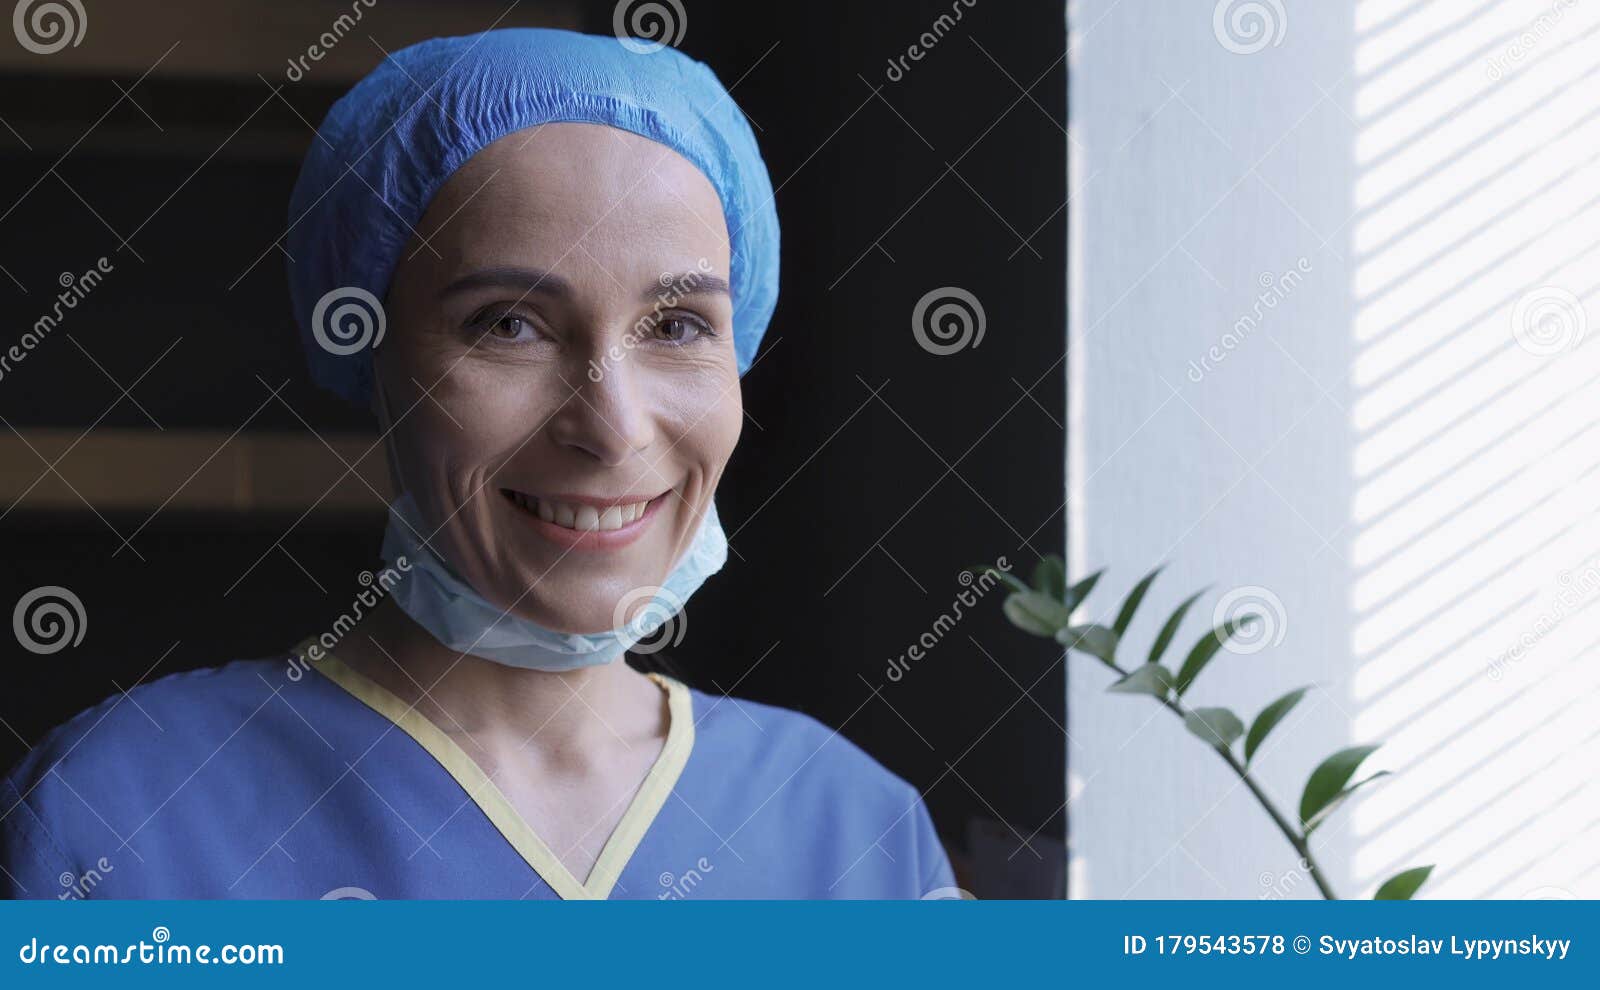 smiling female doctor rejoices standing near window